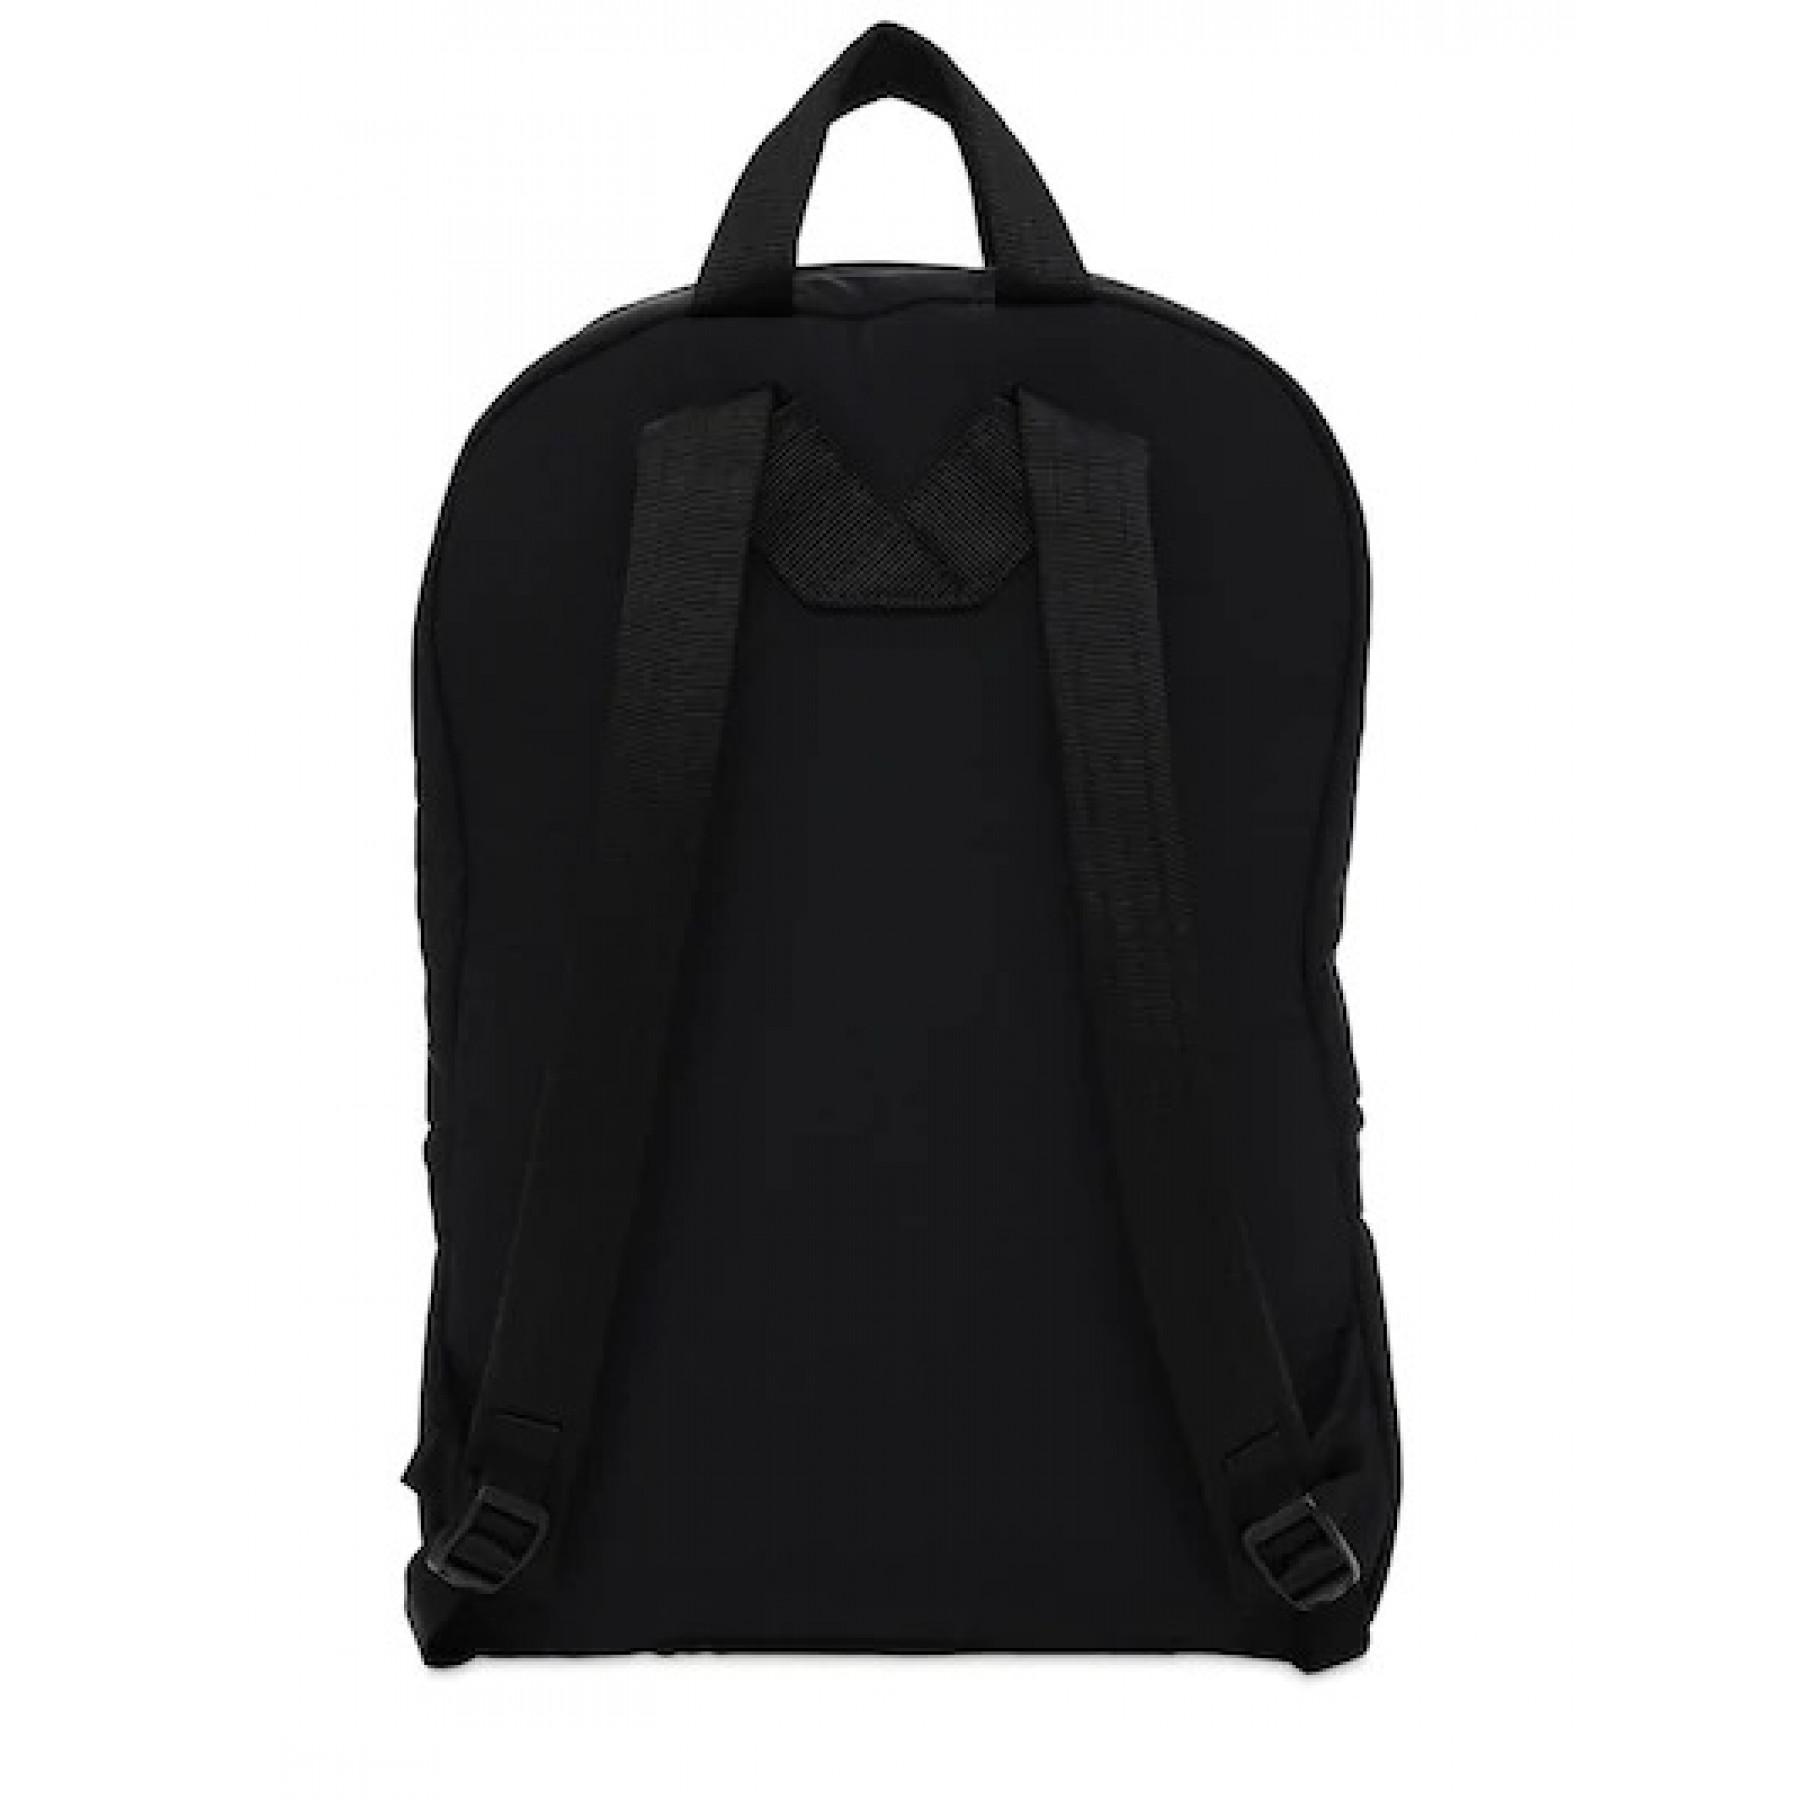 Bag The North Face City Voyager Daypack